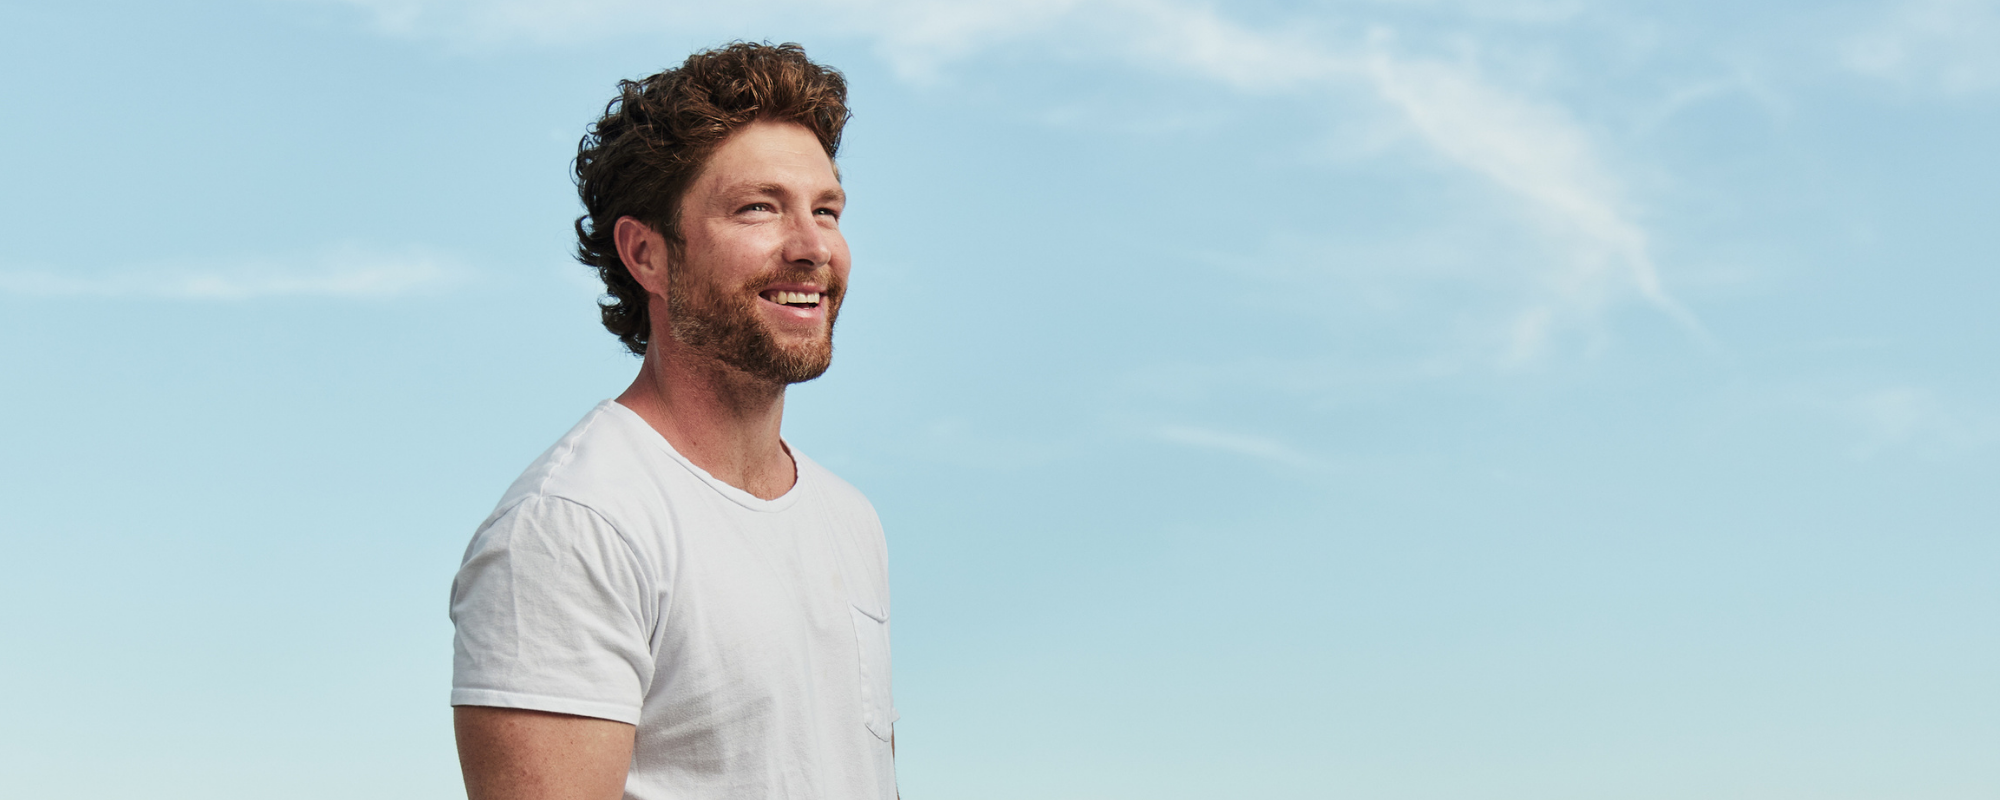 After Welcoming His Baby Boy, Chris Lane Announces Fill Them Boots Fall Tour Dates